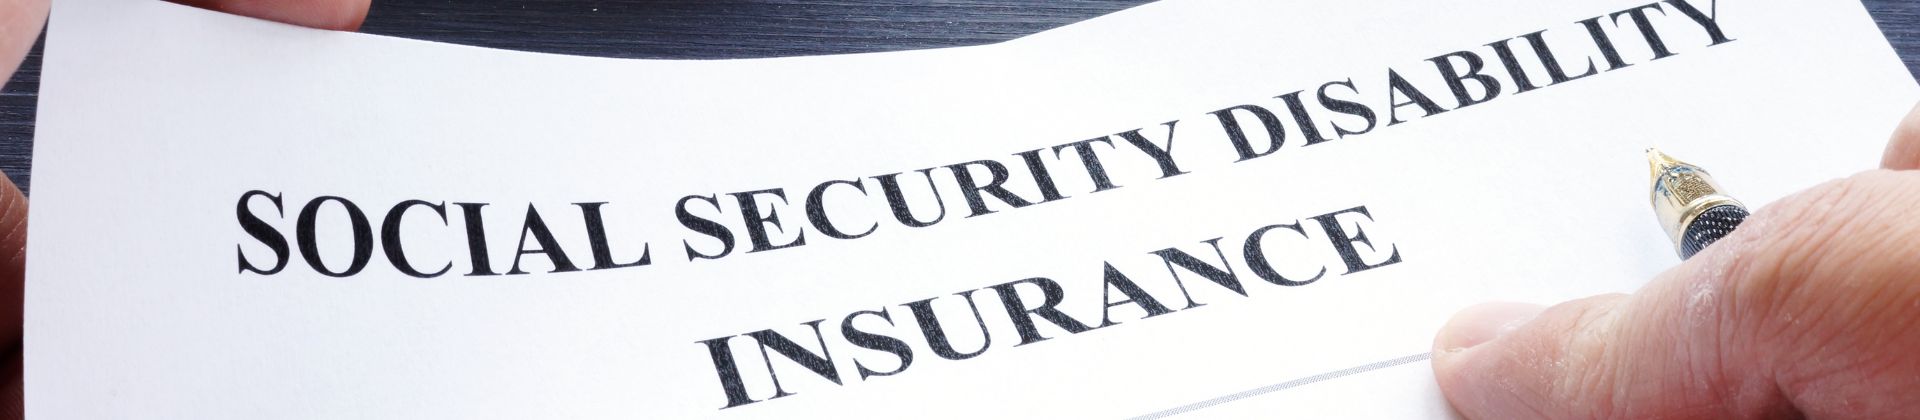 Social security disability insurance application